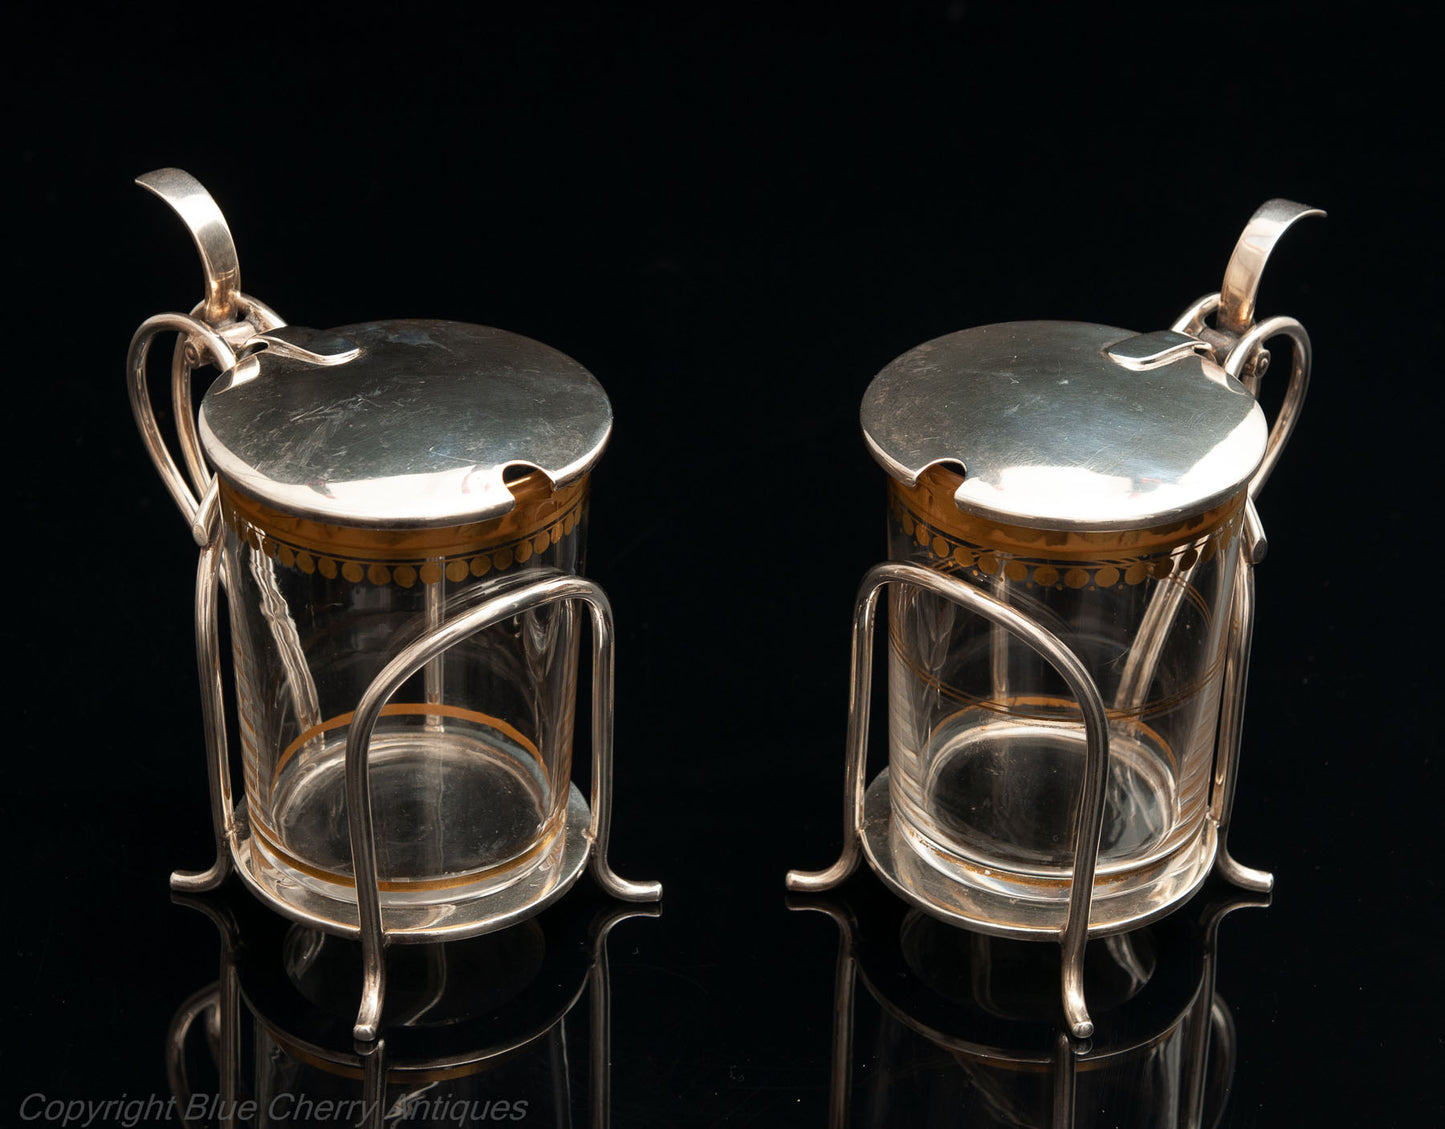 Fine & Rare Pair of Hukin & Heath Silver & Gilt Glass Hot Toddy Cups London 1907 (Code 1637)